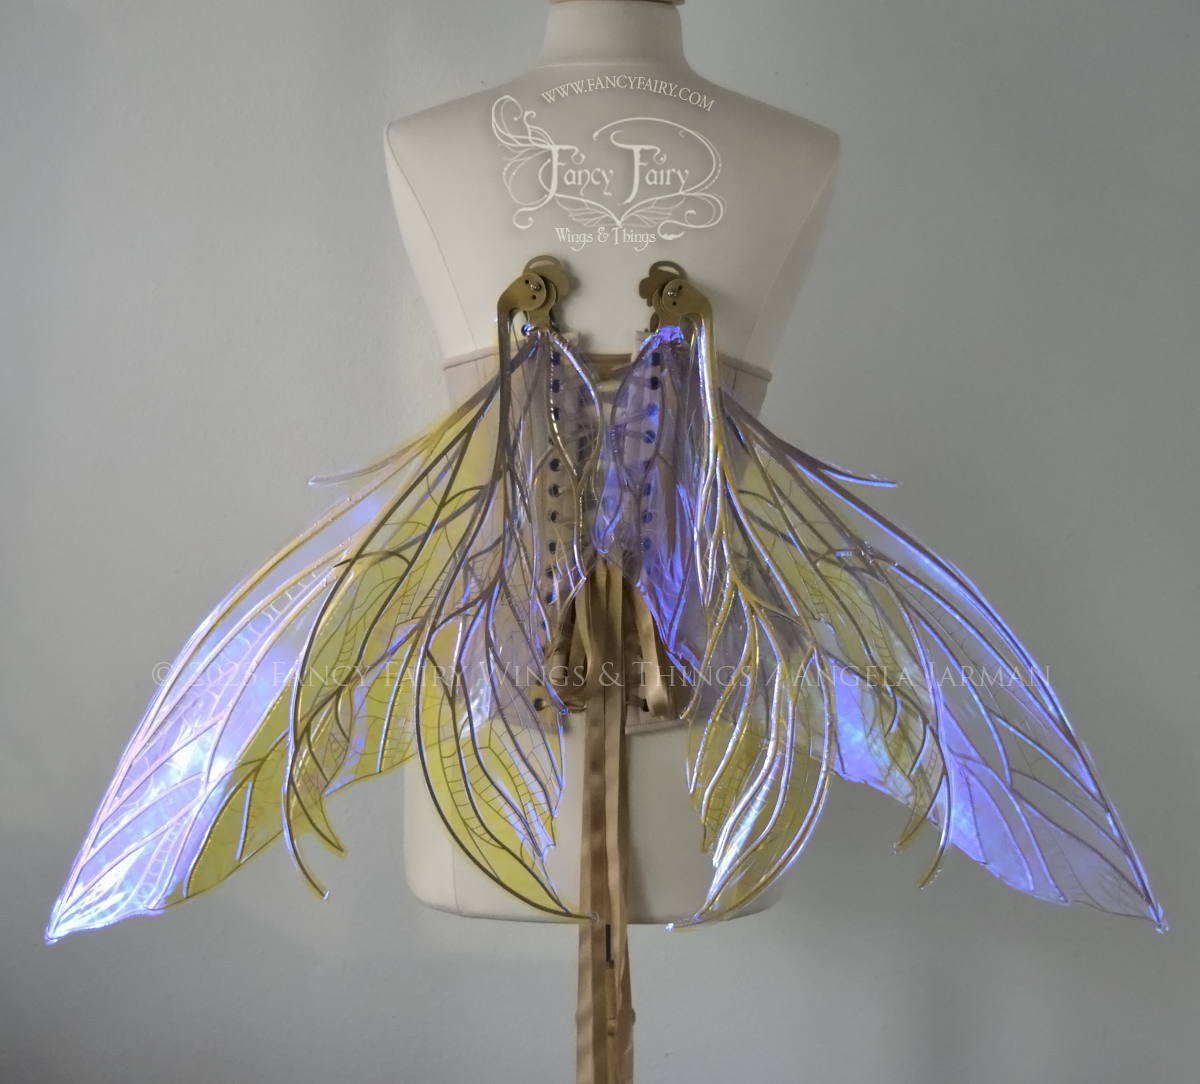 Back view of an ivory dress form wearing an alabaster underbust corset & large violet iridescent fairy wings. Upper panels are elongated with pointed tips, 2 lower panels curve downward, lots of thin vein detail in gold, in resting position